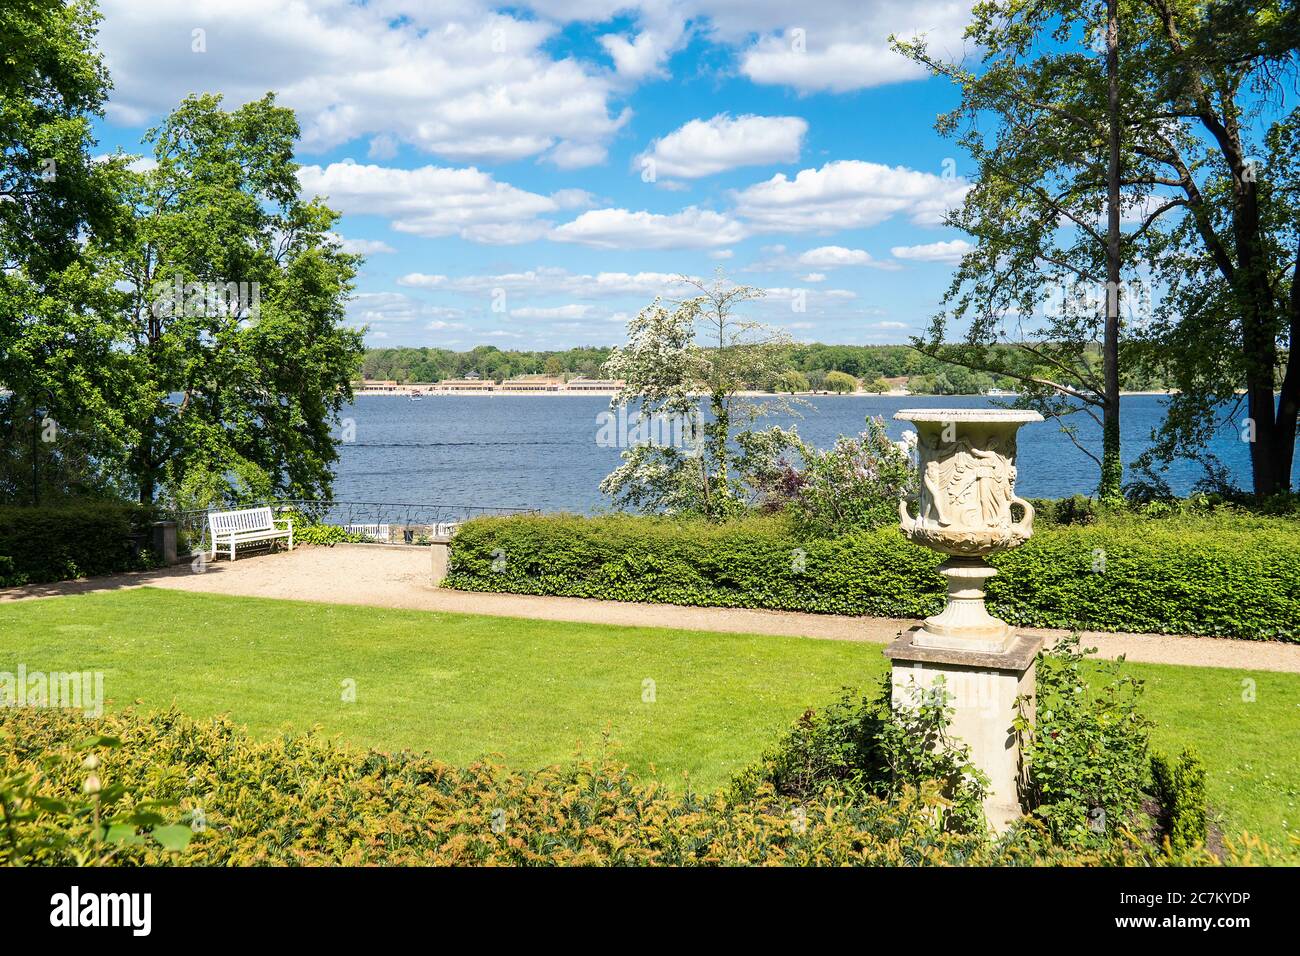 Berlin, Wannsee, House of the Wannsee Conference, garden with lake view Stock Photo